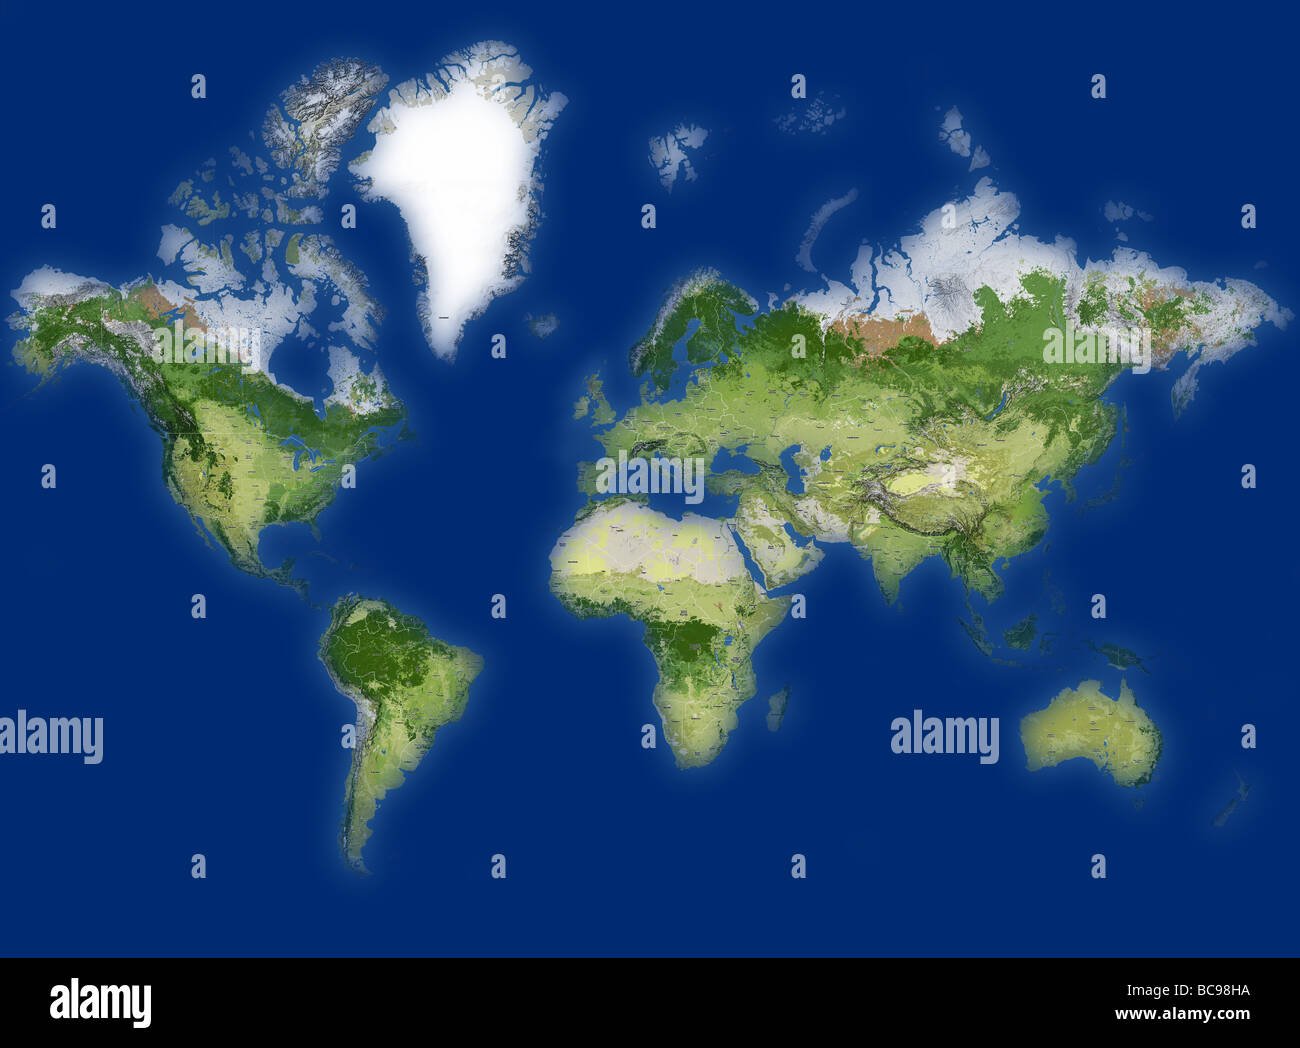 world map in blue background Stock Photo